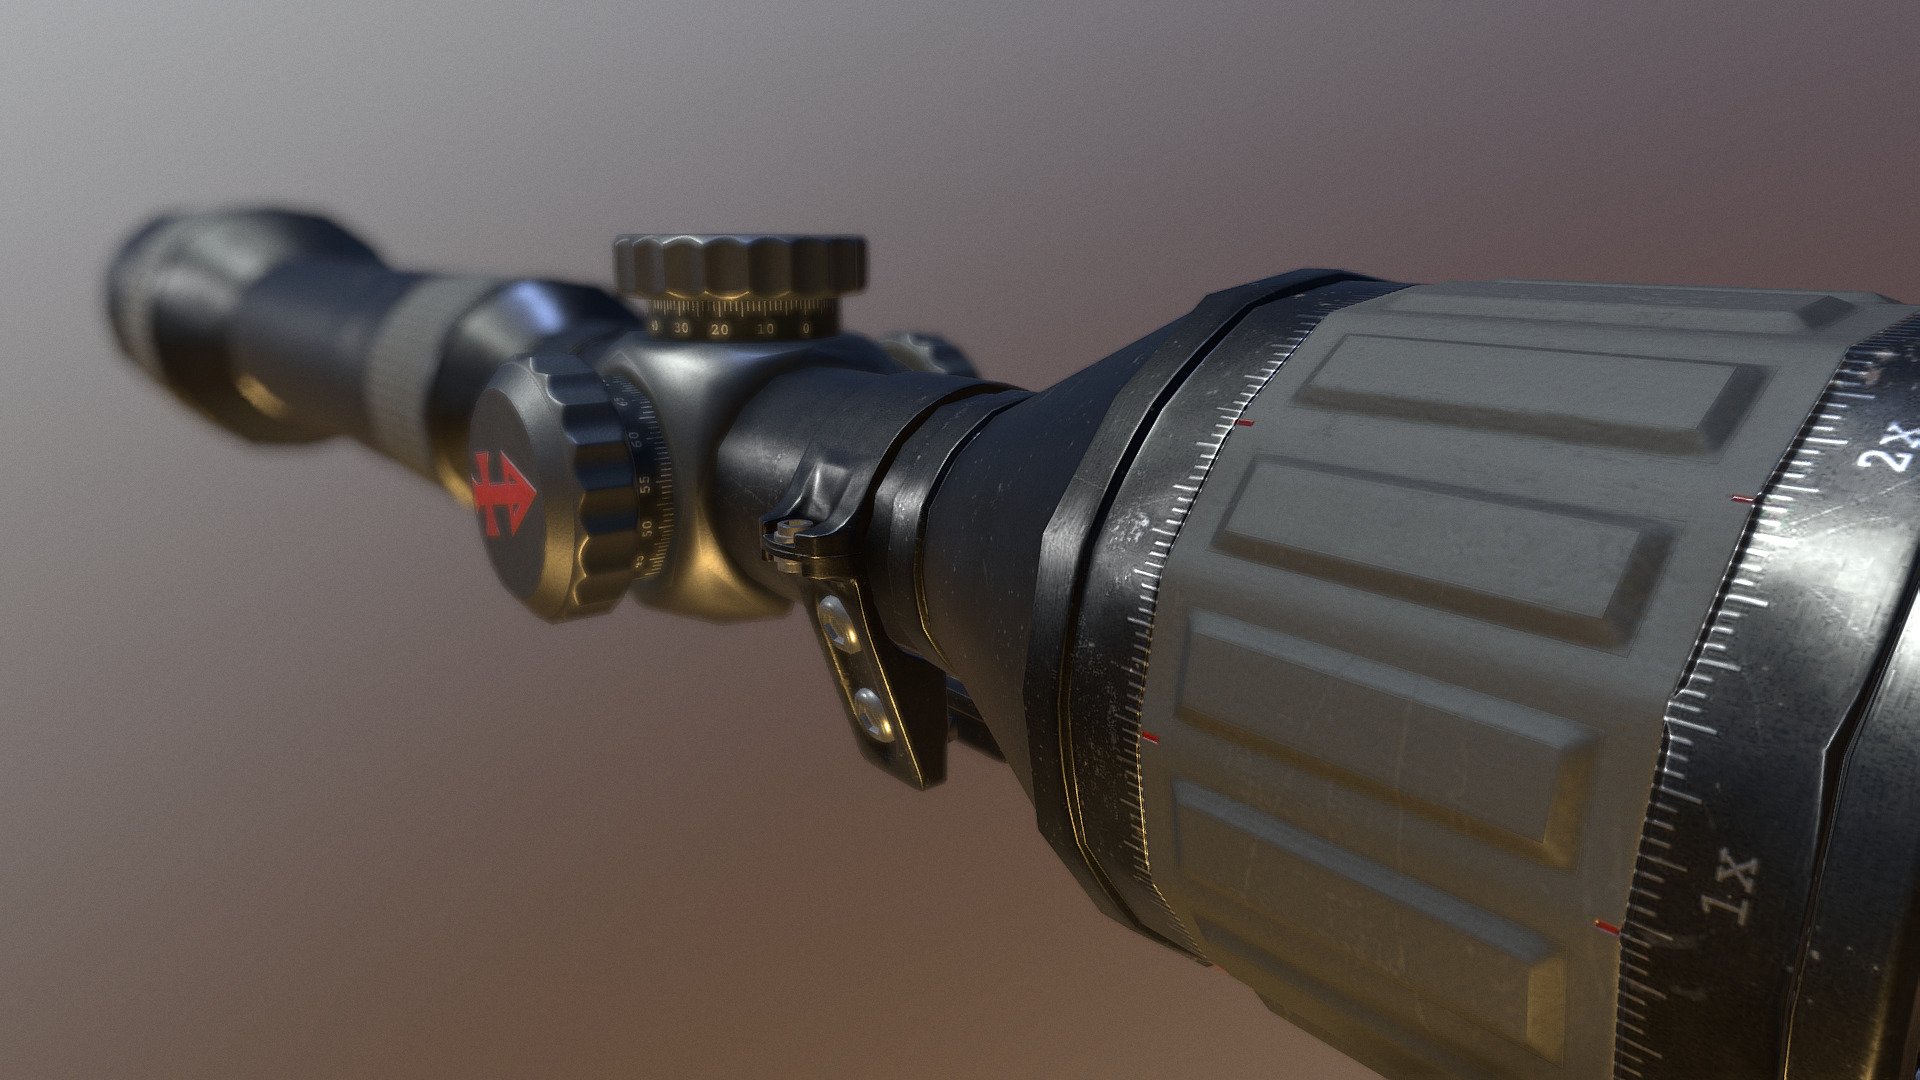 This is the scope for the Mephisto Sniper Rifle from Mutant Chronicles RPG with some tweaks of my own.
It is the Low Poly version (Polys: 4016, Tris: 7858, Verts: 4111, Texture Res 4096K) - Mephisto Scope - Mutant chronicles - 3D model by Franck (@f_dhotel) 3d model